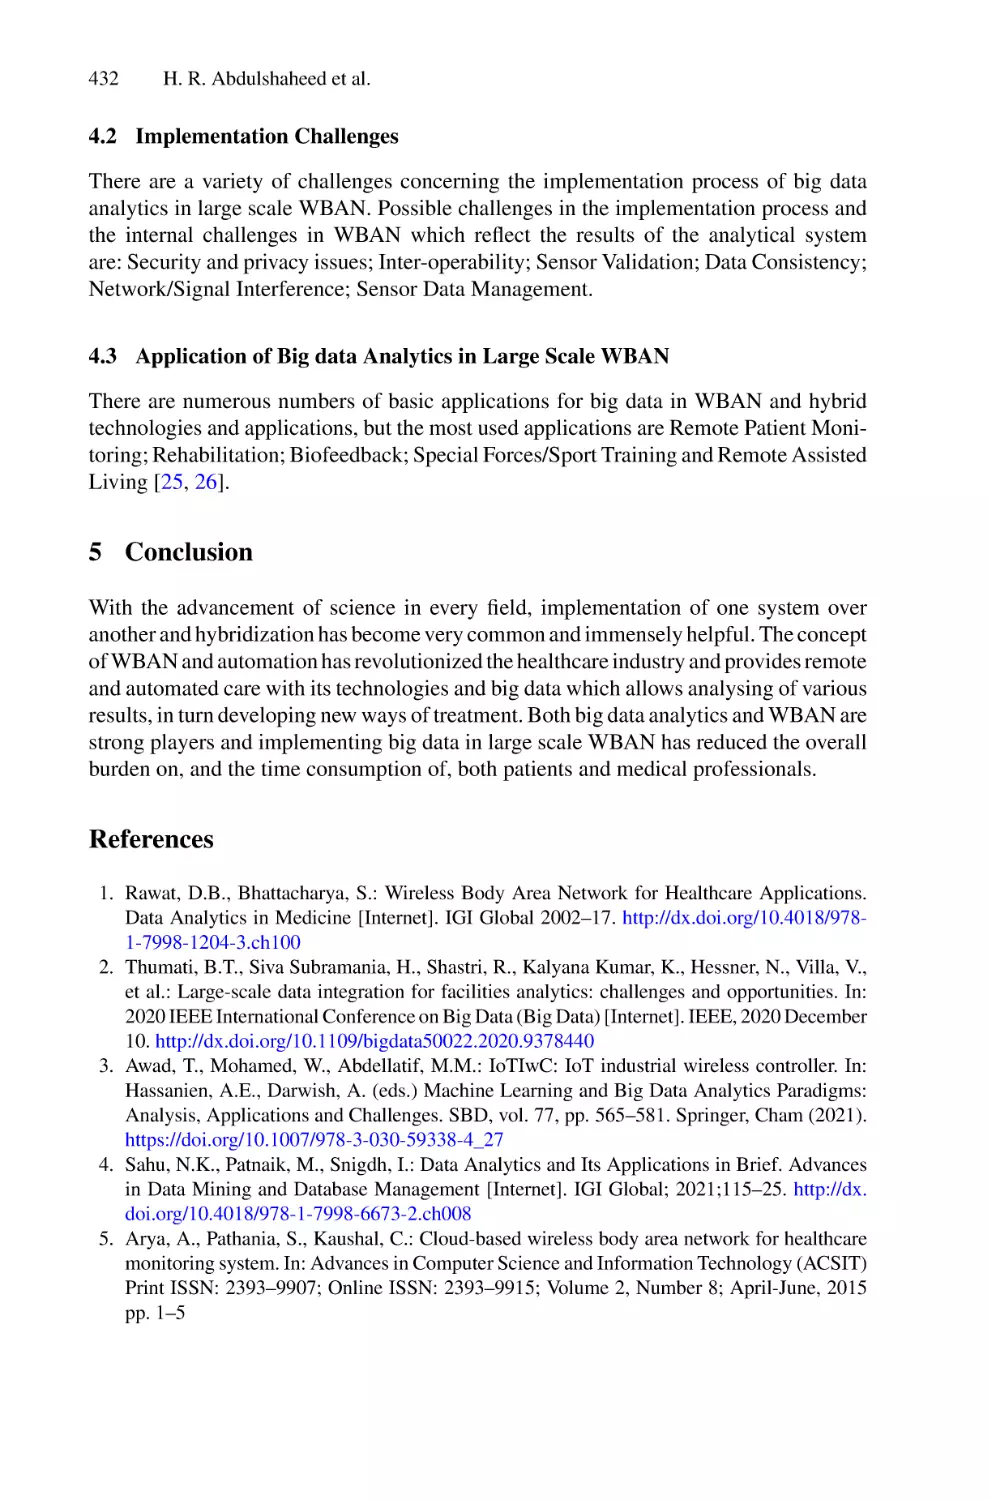 4.2 Implementation Challenges
4.3 Application of Big data Analytics in Large Scale WBAN
5 Conclusion
References